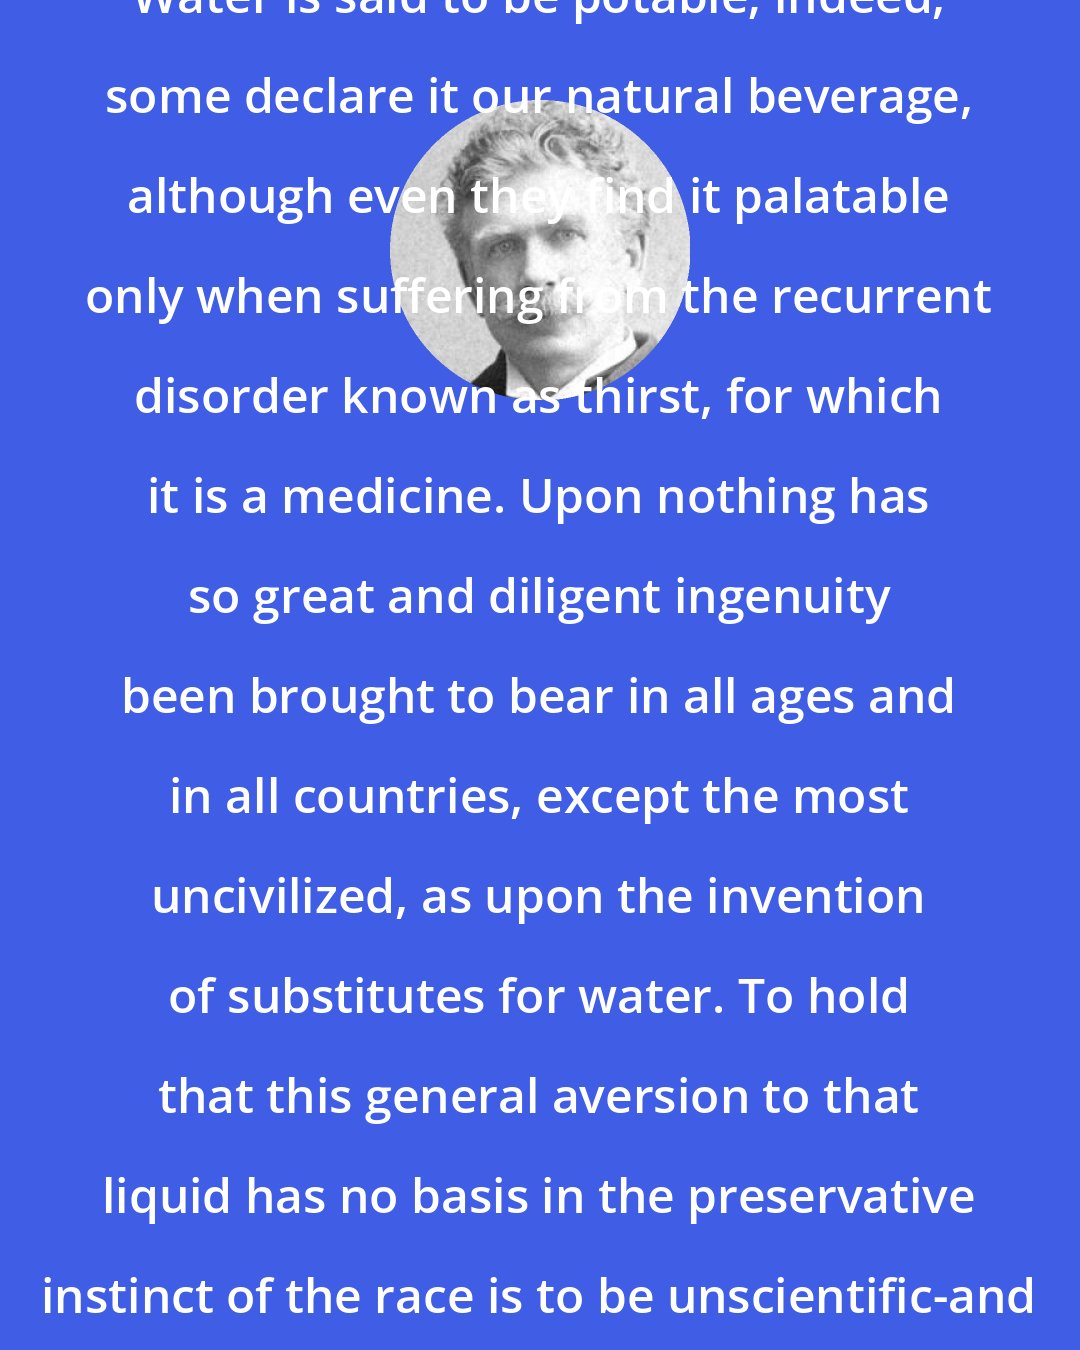 Ambrose Bierce: POTABLE, n. Suitable for drinking. Water is said to be potable; indeed, some declare it our natural beverage, although even they find it palatable only when suffering from the recurrent disorder known as thirst, for which it is a medicine. Upon nothing has so great and diligent ingenuity been brought to bear in all ages and in all countries, except the most uncivilized, as upon the invention of substitutes for water. To hold that this general aversion to that liquid has no basis in the preservative instinct of the race is to be unscientific-and without science we are as the snakes and toads.